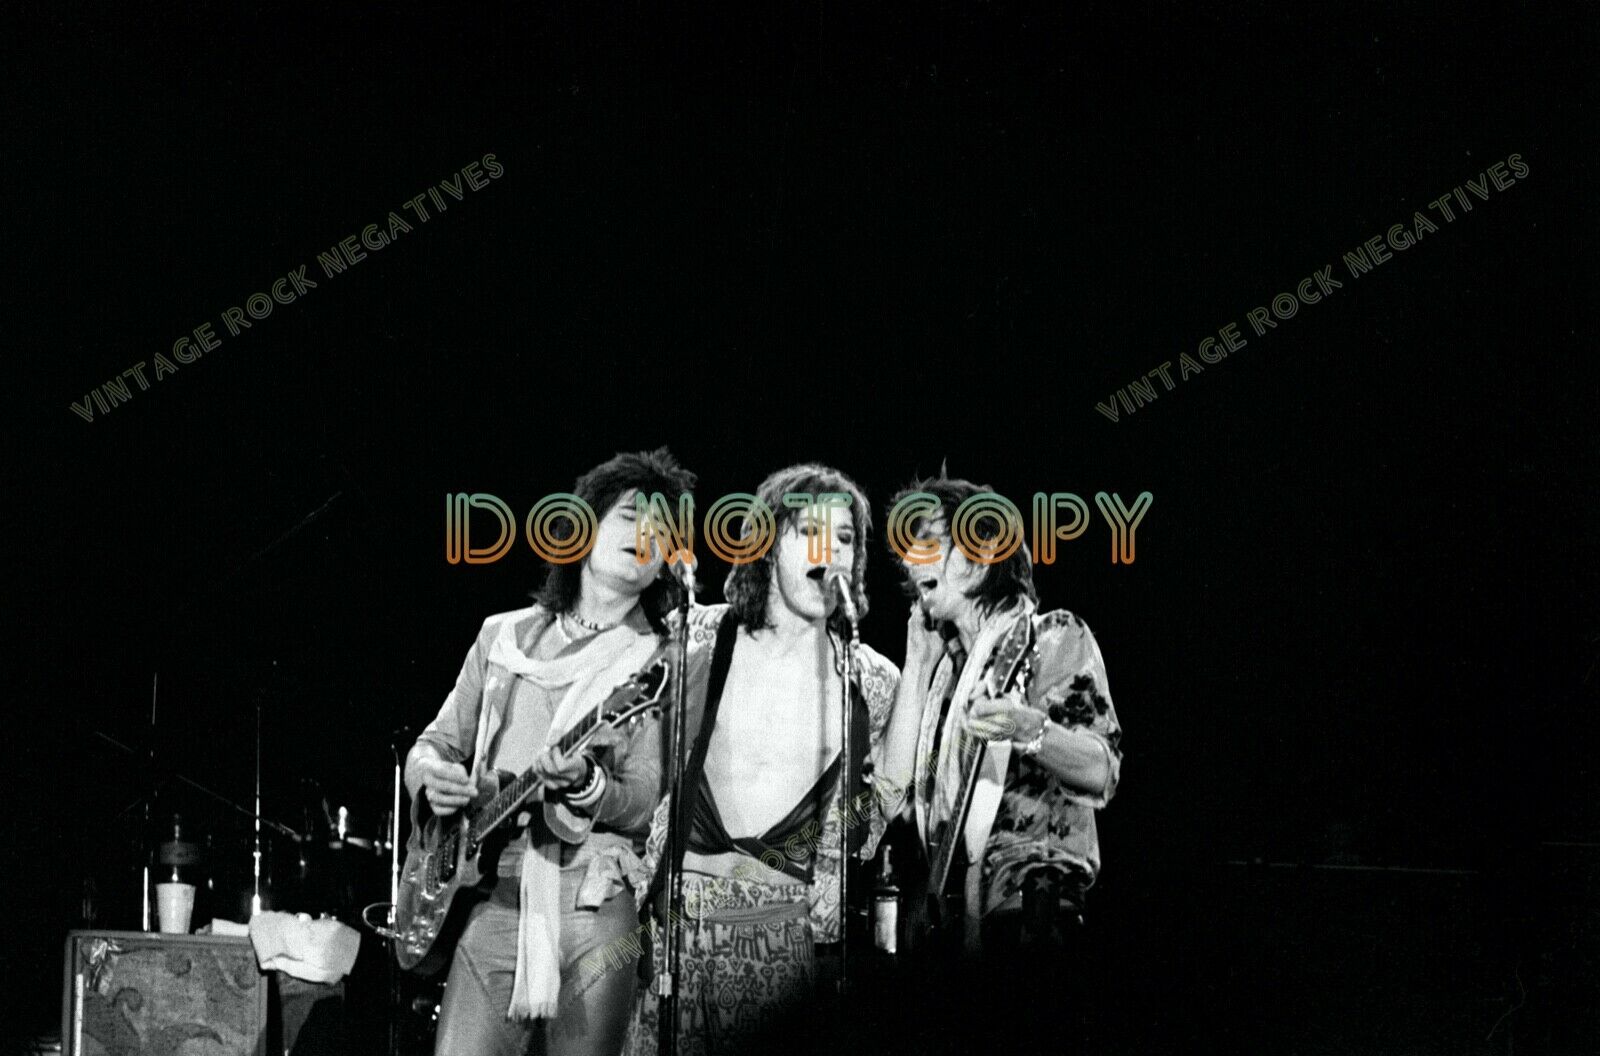 Rolling Stones Msg 1975 Unseen Fine Art Archival Photo 8.5x11 From The Negative